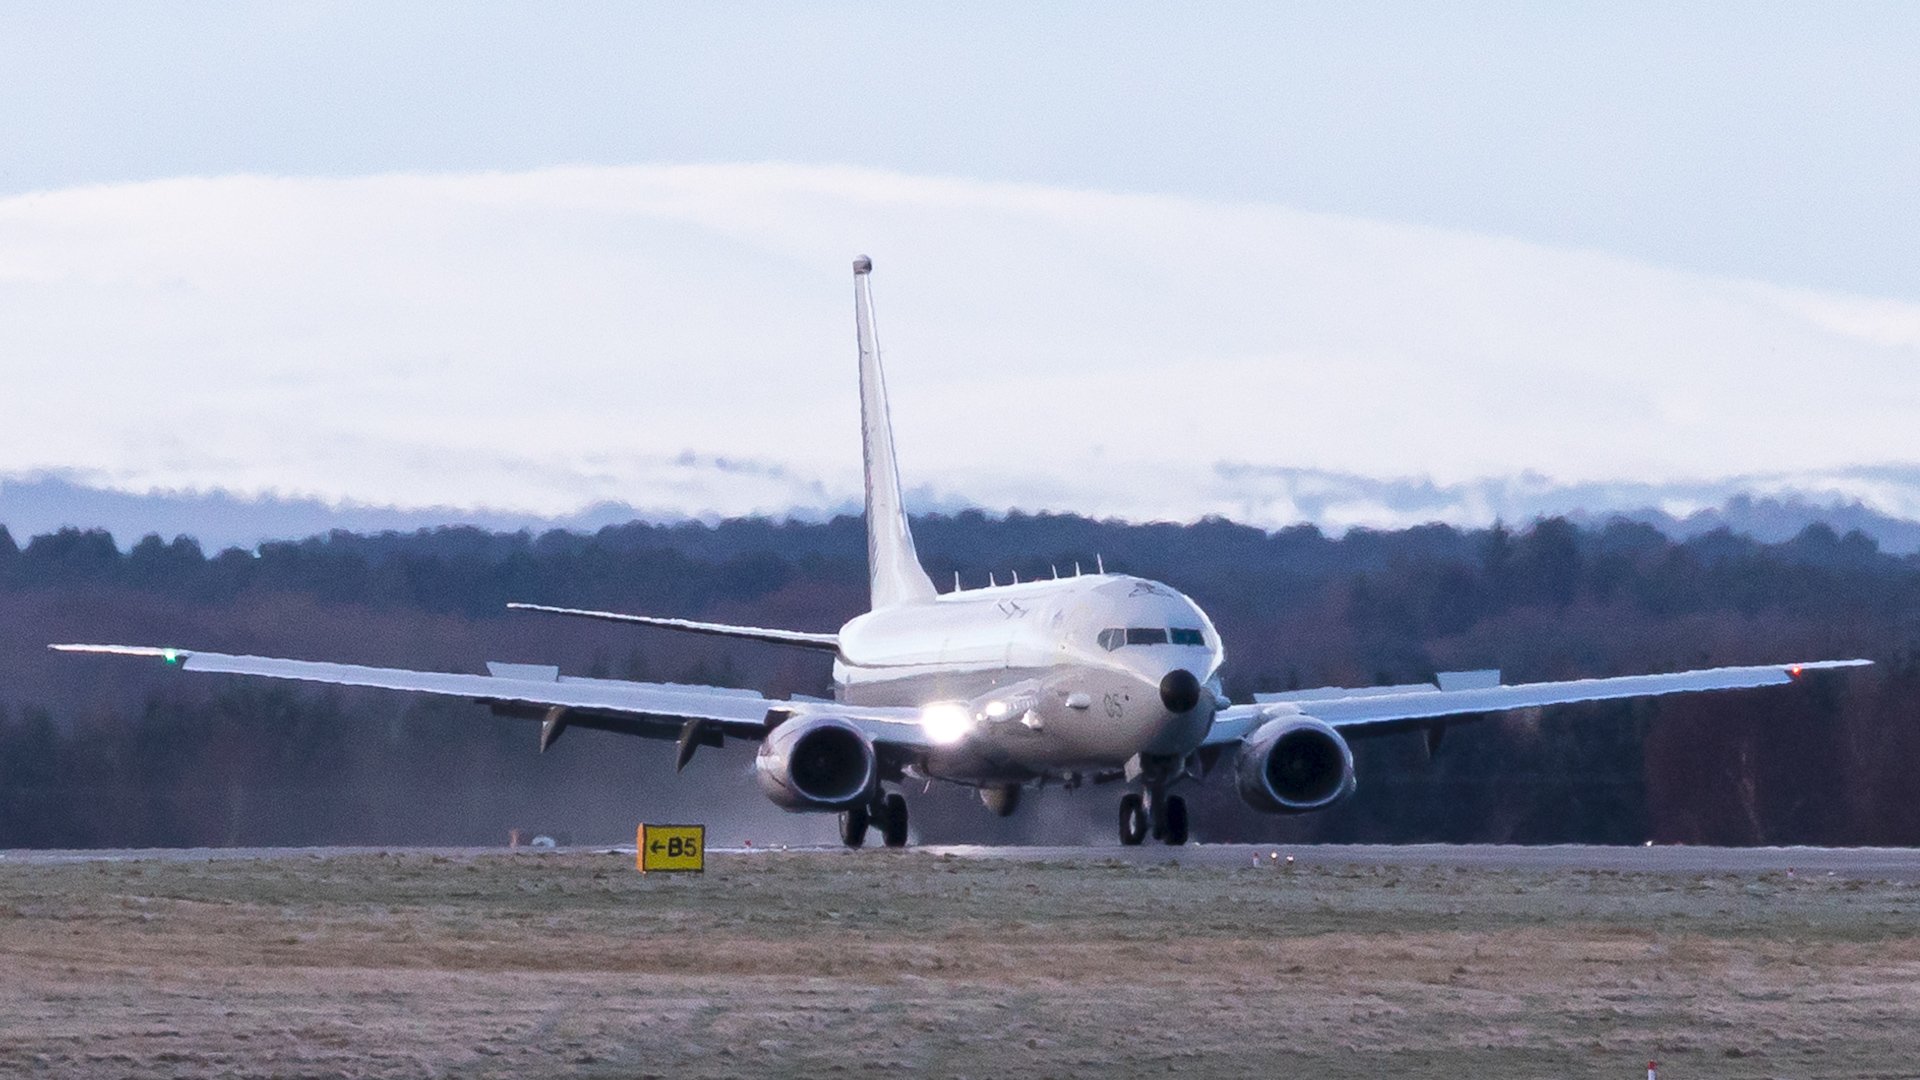 Fifth PA8 Poseidon aircraft lands at RAF Lossiemouth for the first time from Seattle, US 020221 CREDIT MOD